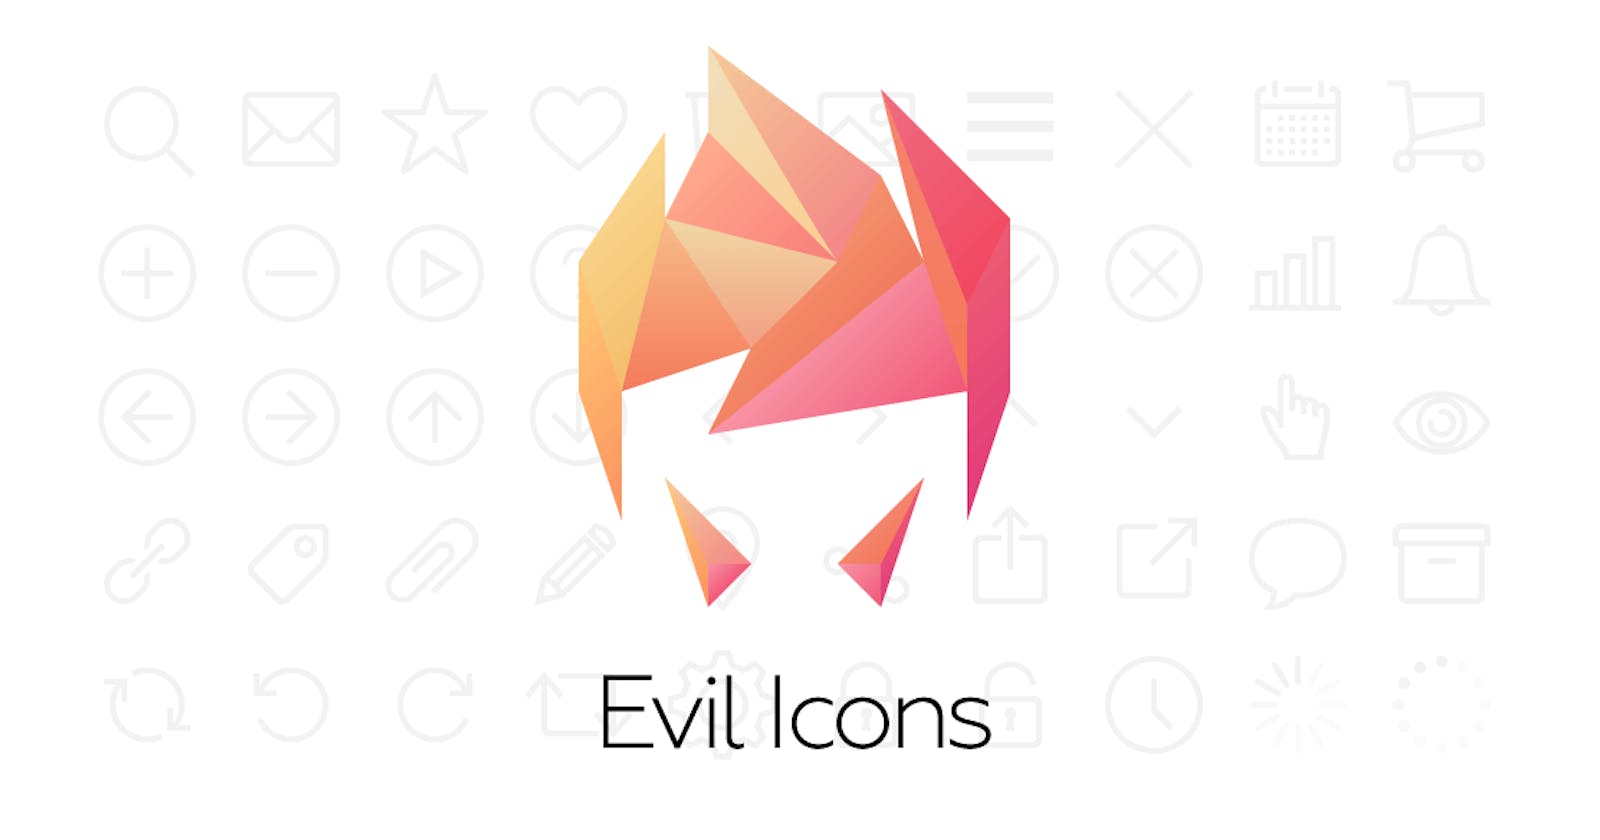 Evil Icons - Simple and clean SVG icon pack (Free & Open)